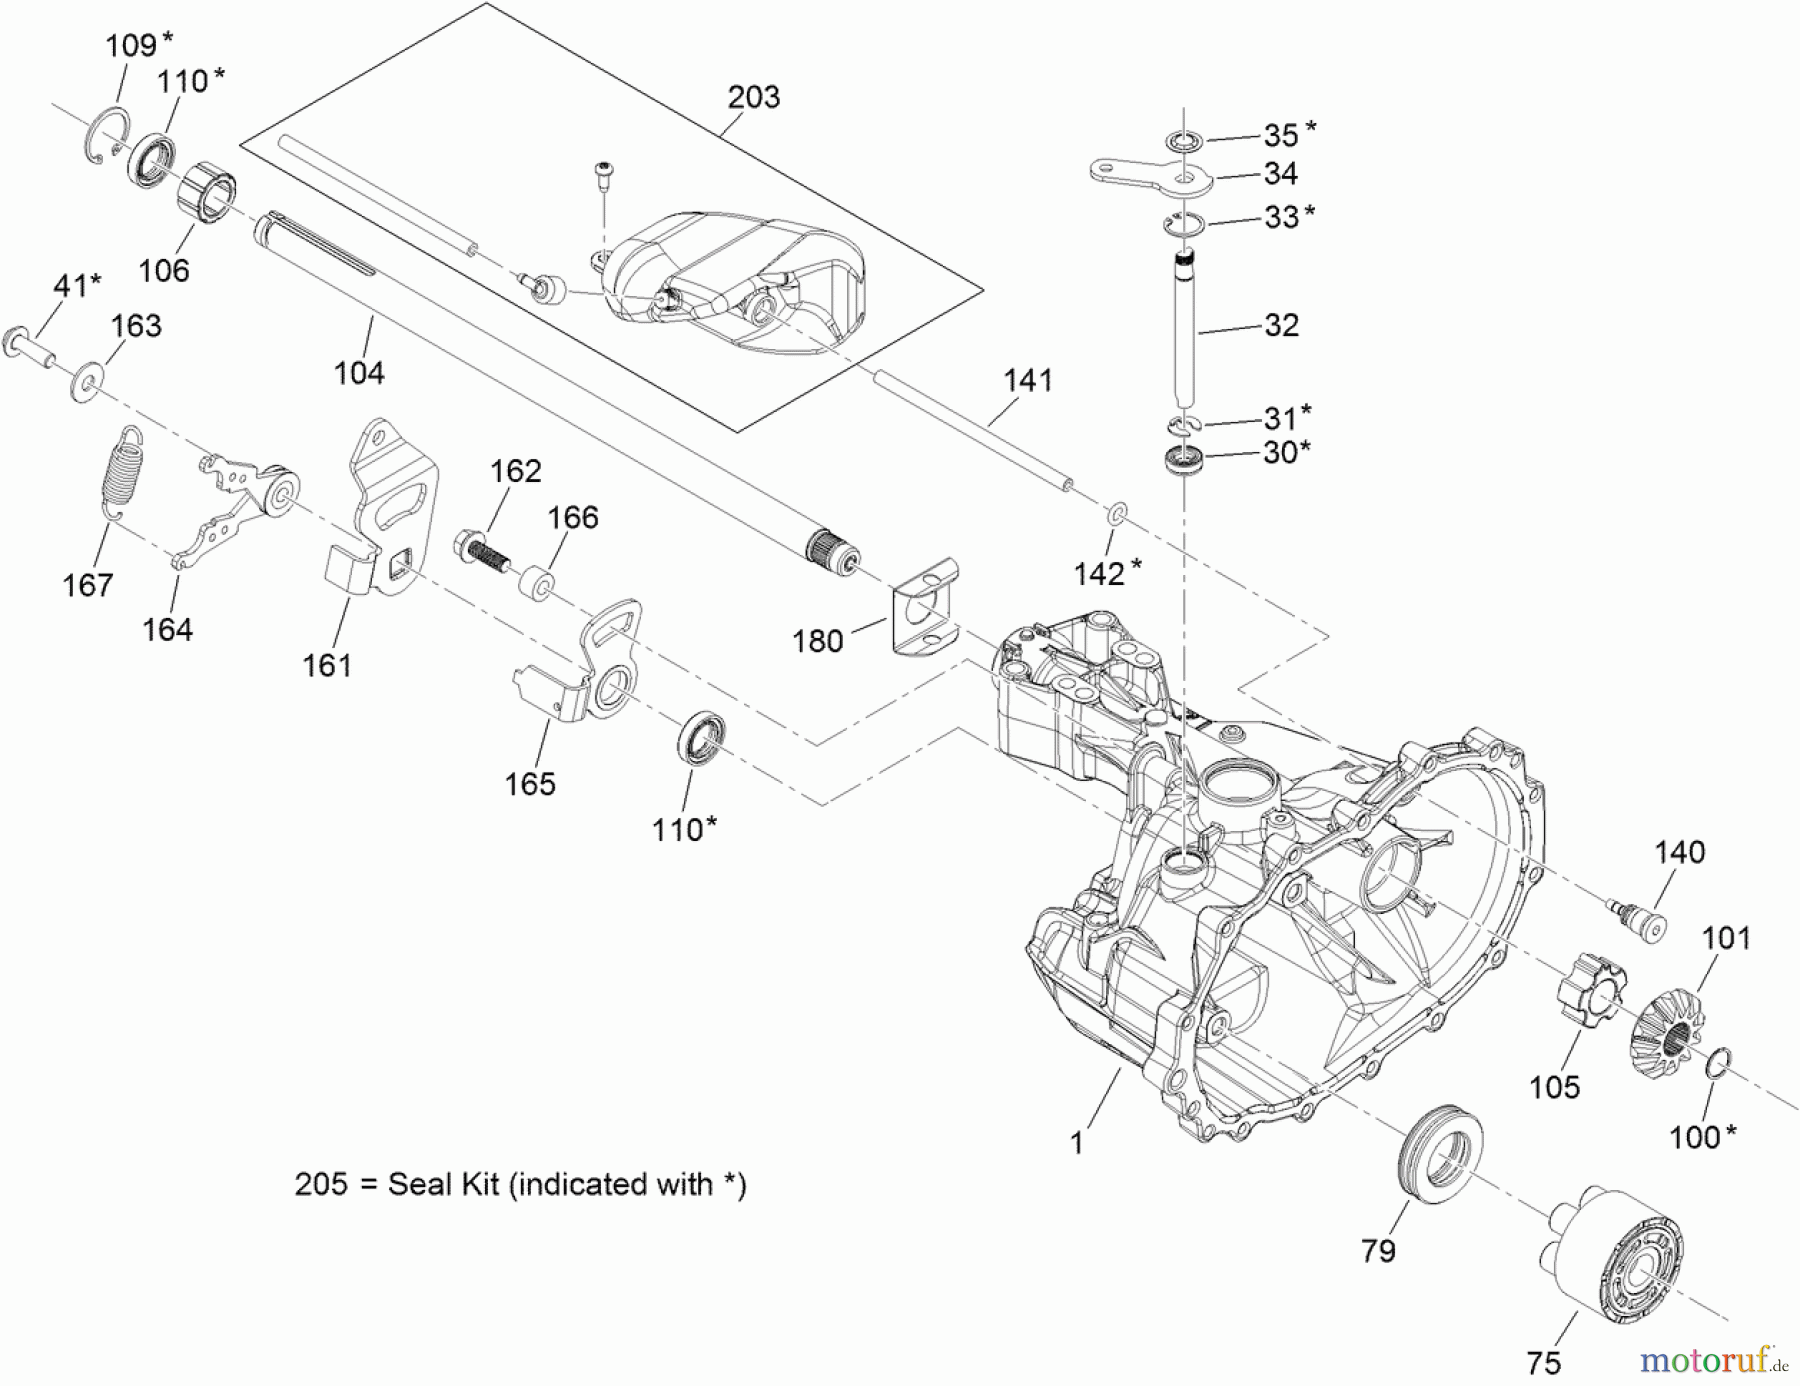  Toro Neu Mowers, Lawn & Garden Tractor Seite 1 74560 (DH 140) - Toro DH 140 Lawn Tractor, 2012 (SN 312000001-312999999) MAIN HOUSING TRANSMISSION ASSEMBLY NO. 121-0999